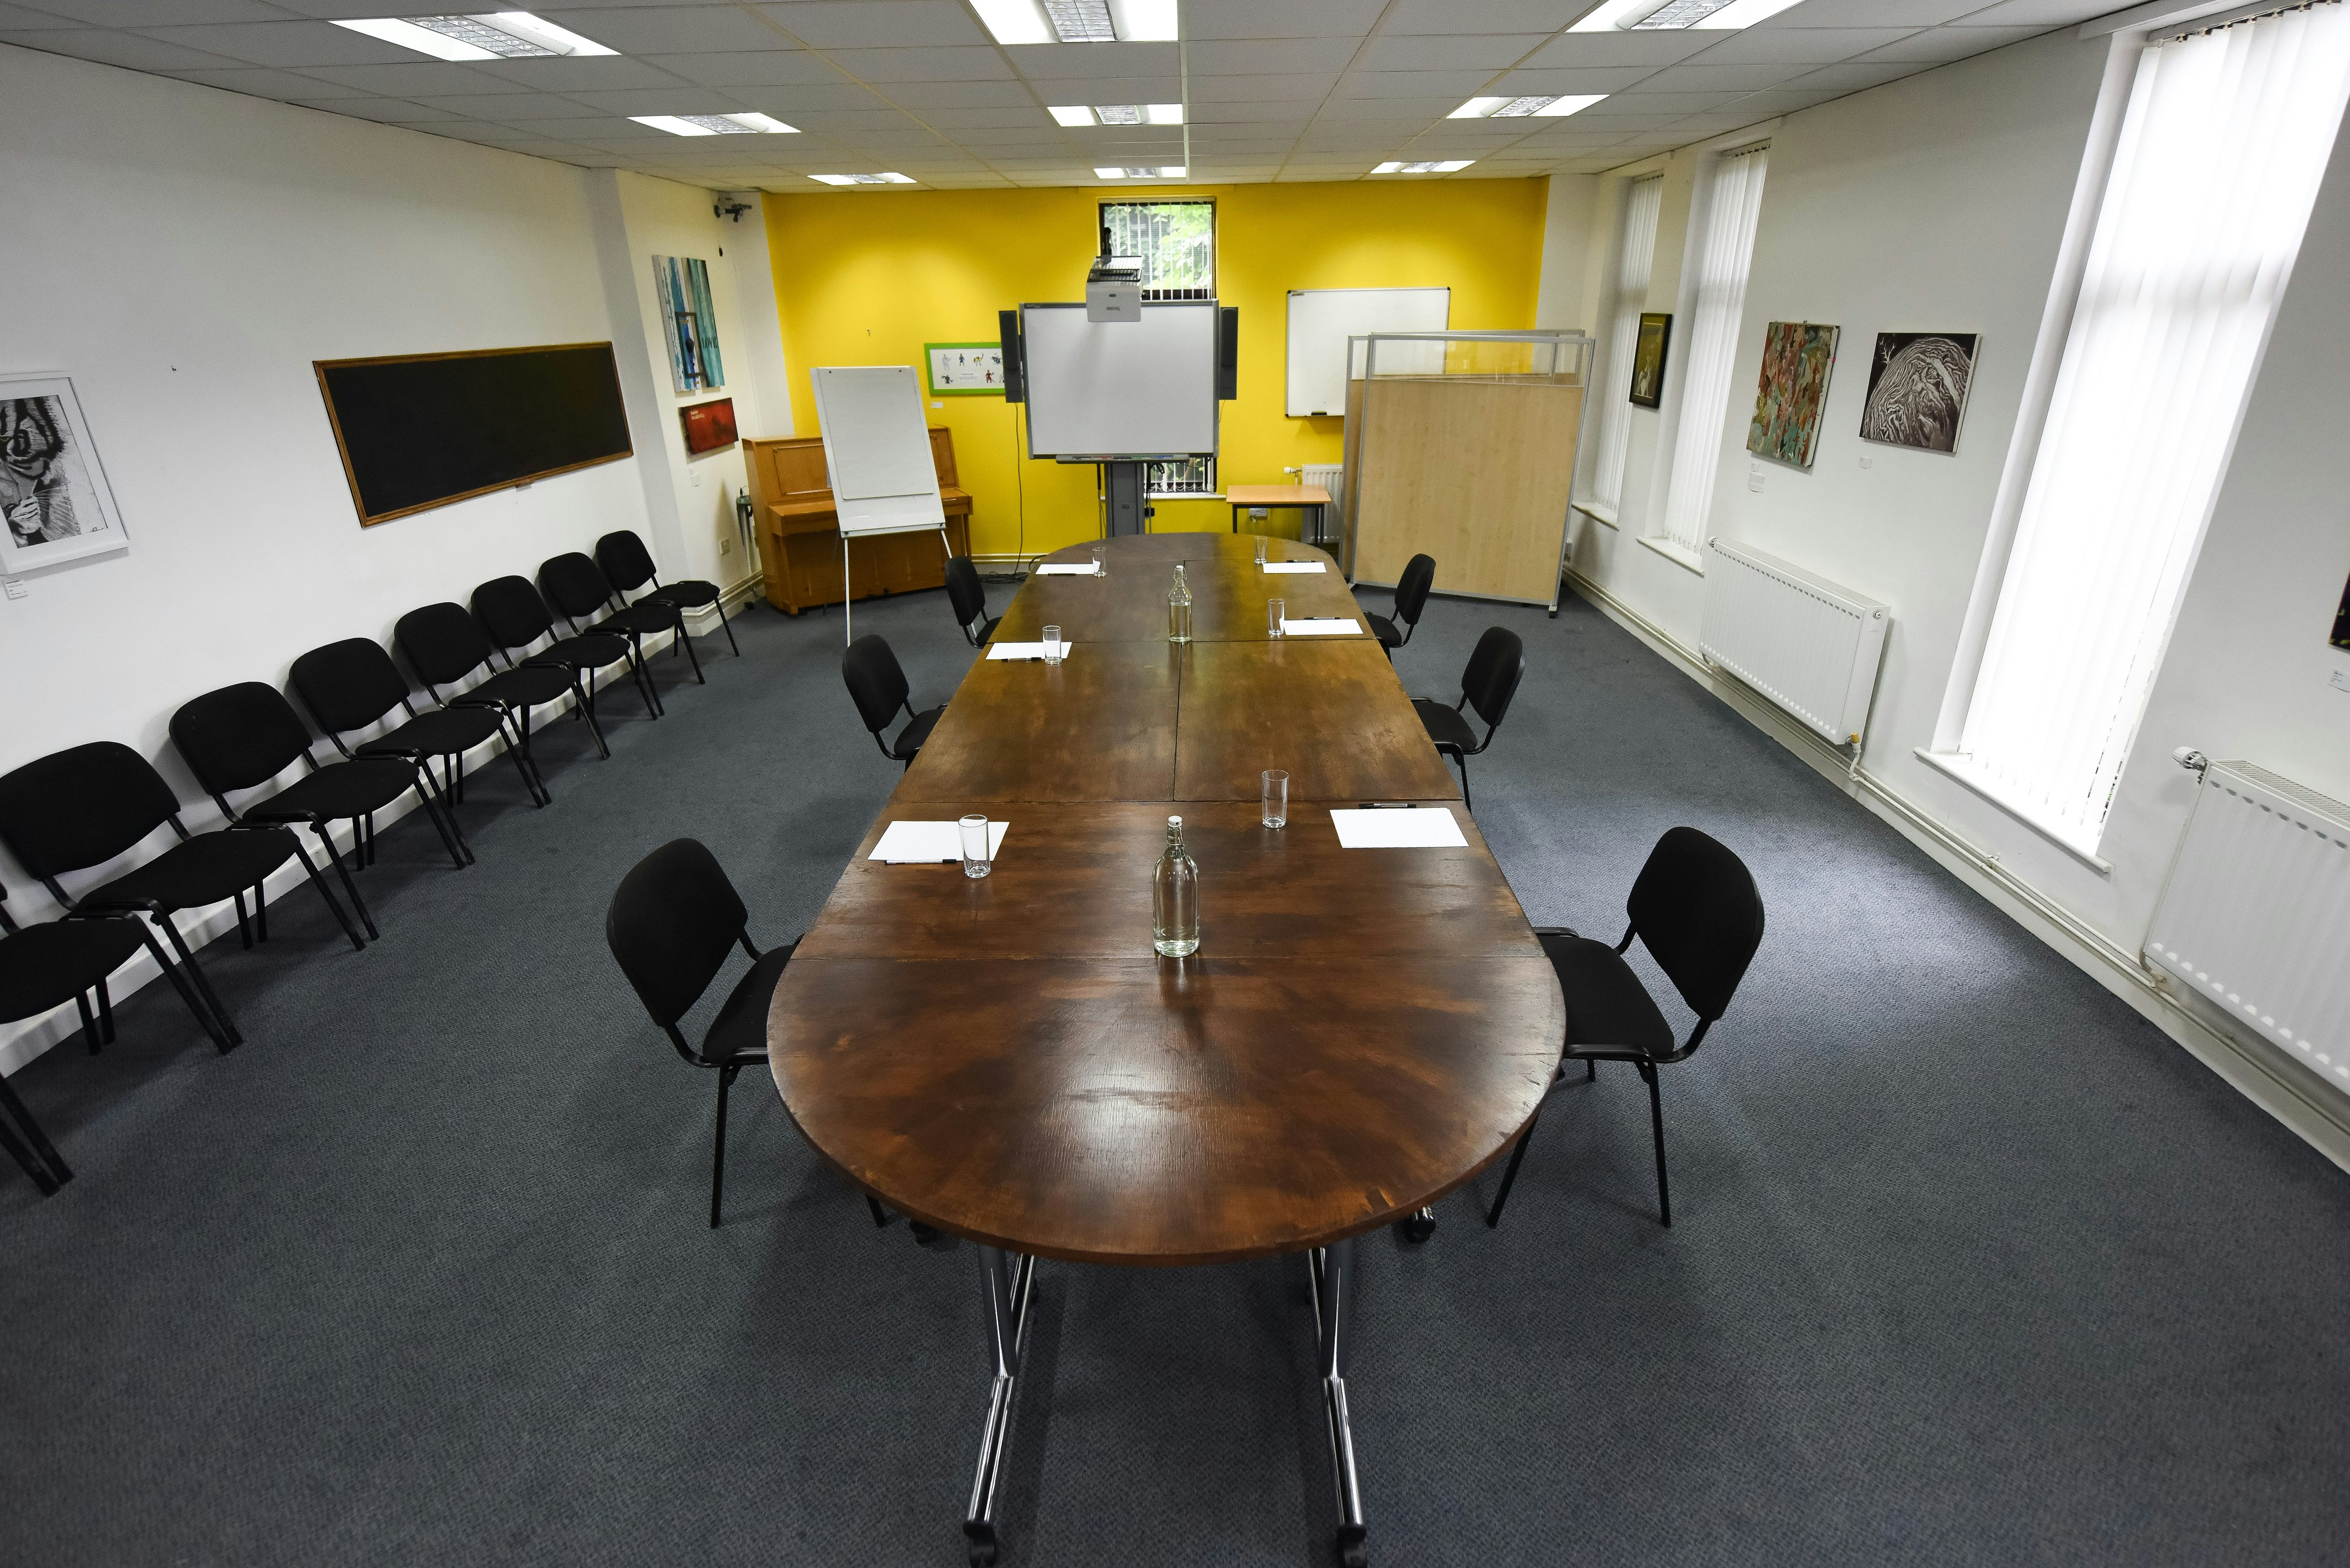 Meeting Rooms Venues in Liverpool - The Brain Charity